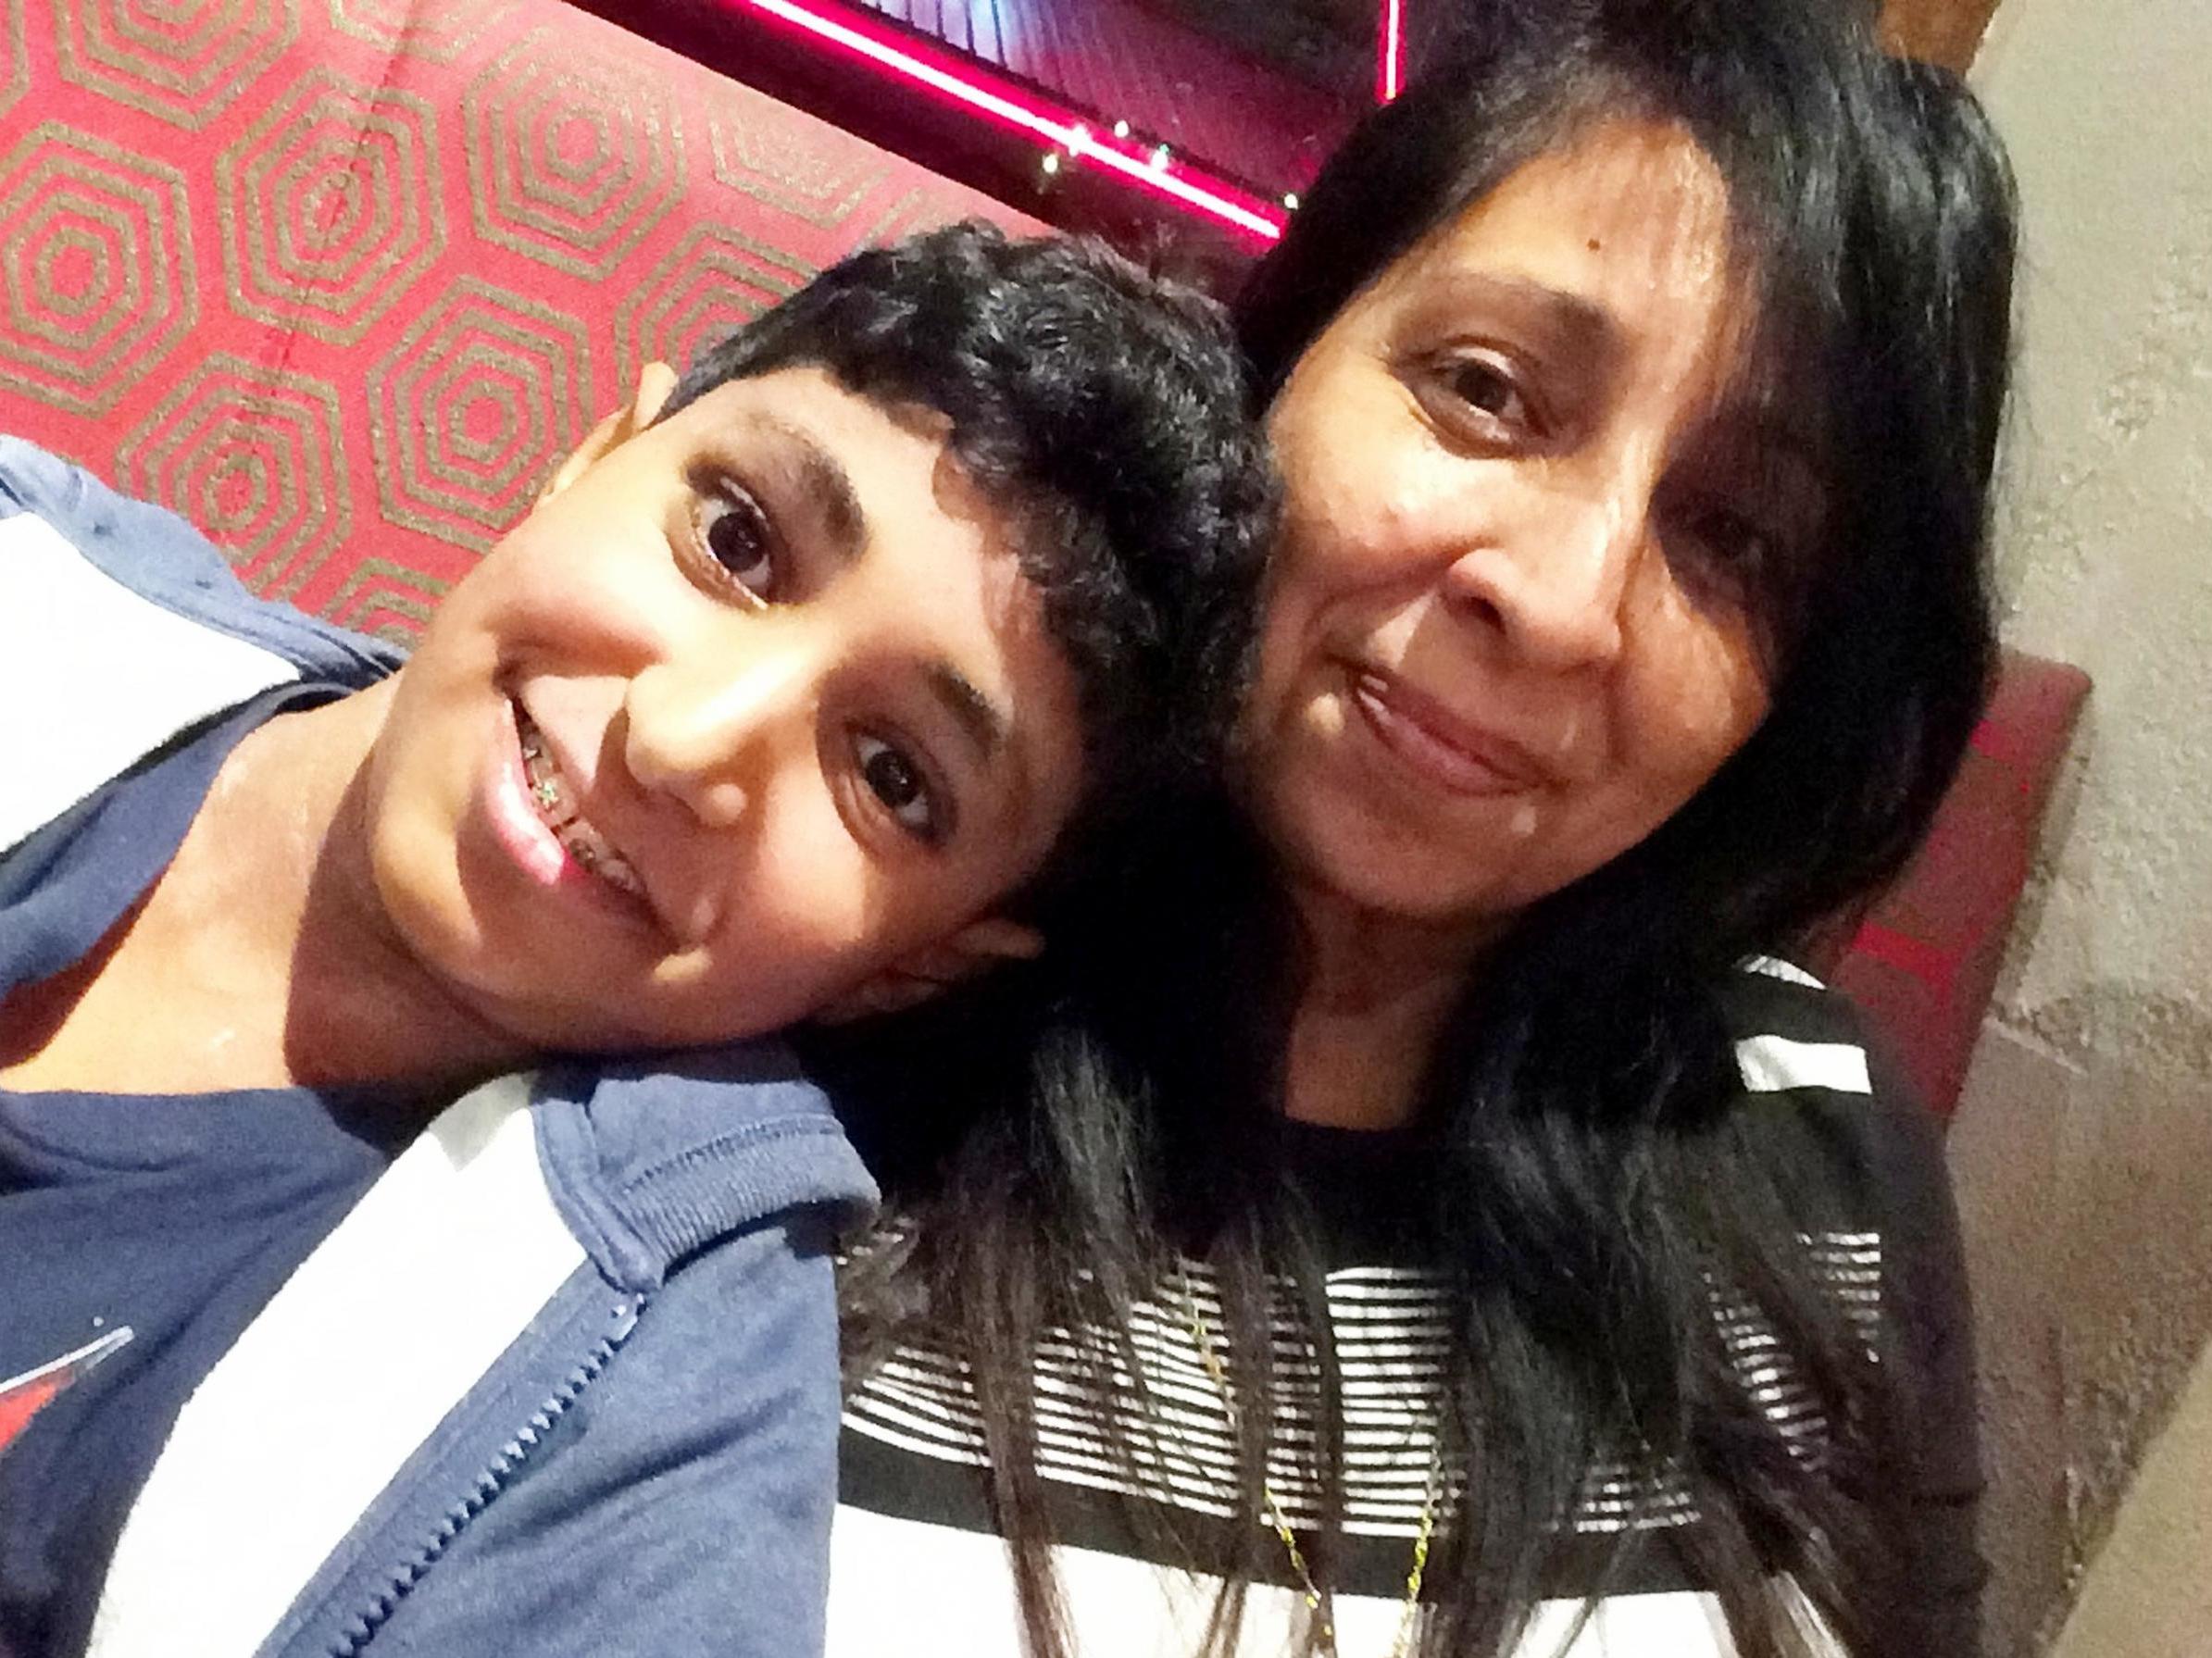 Karanbir Cheema with his mother Rina, who said in a statement that the school had a full report on his allergies